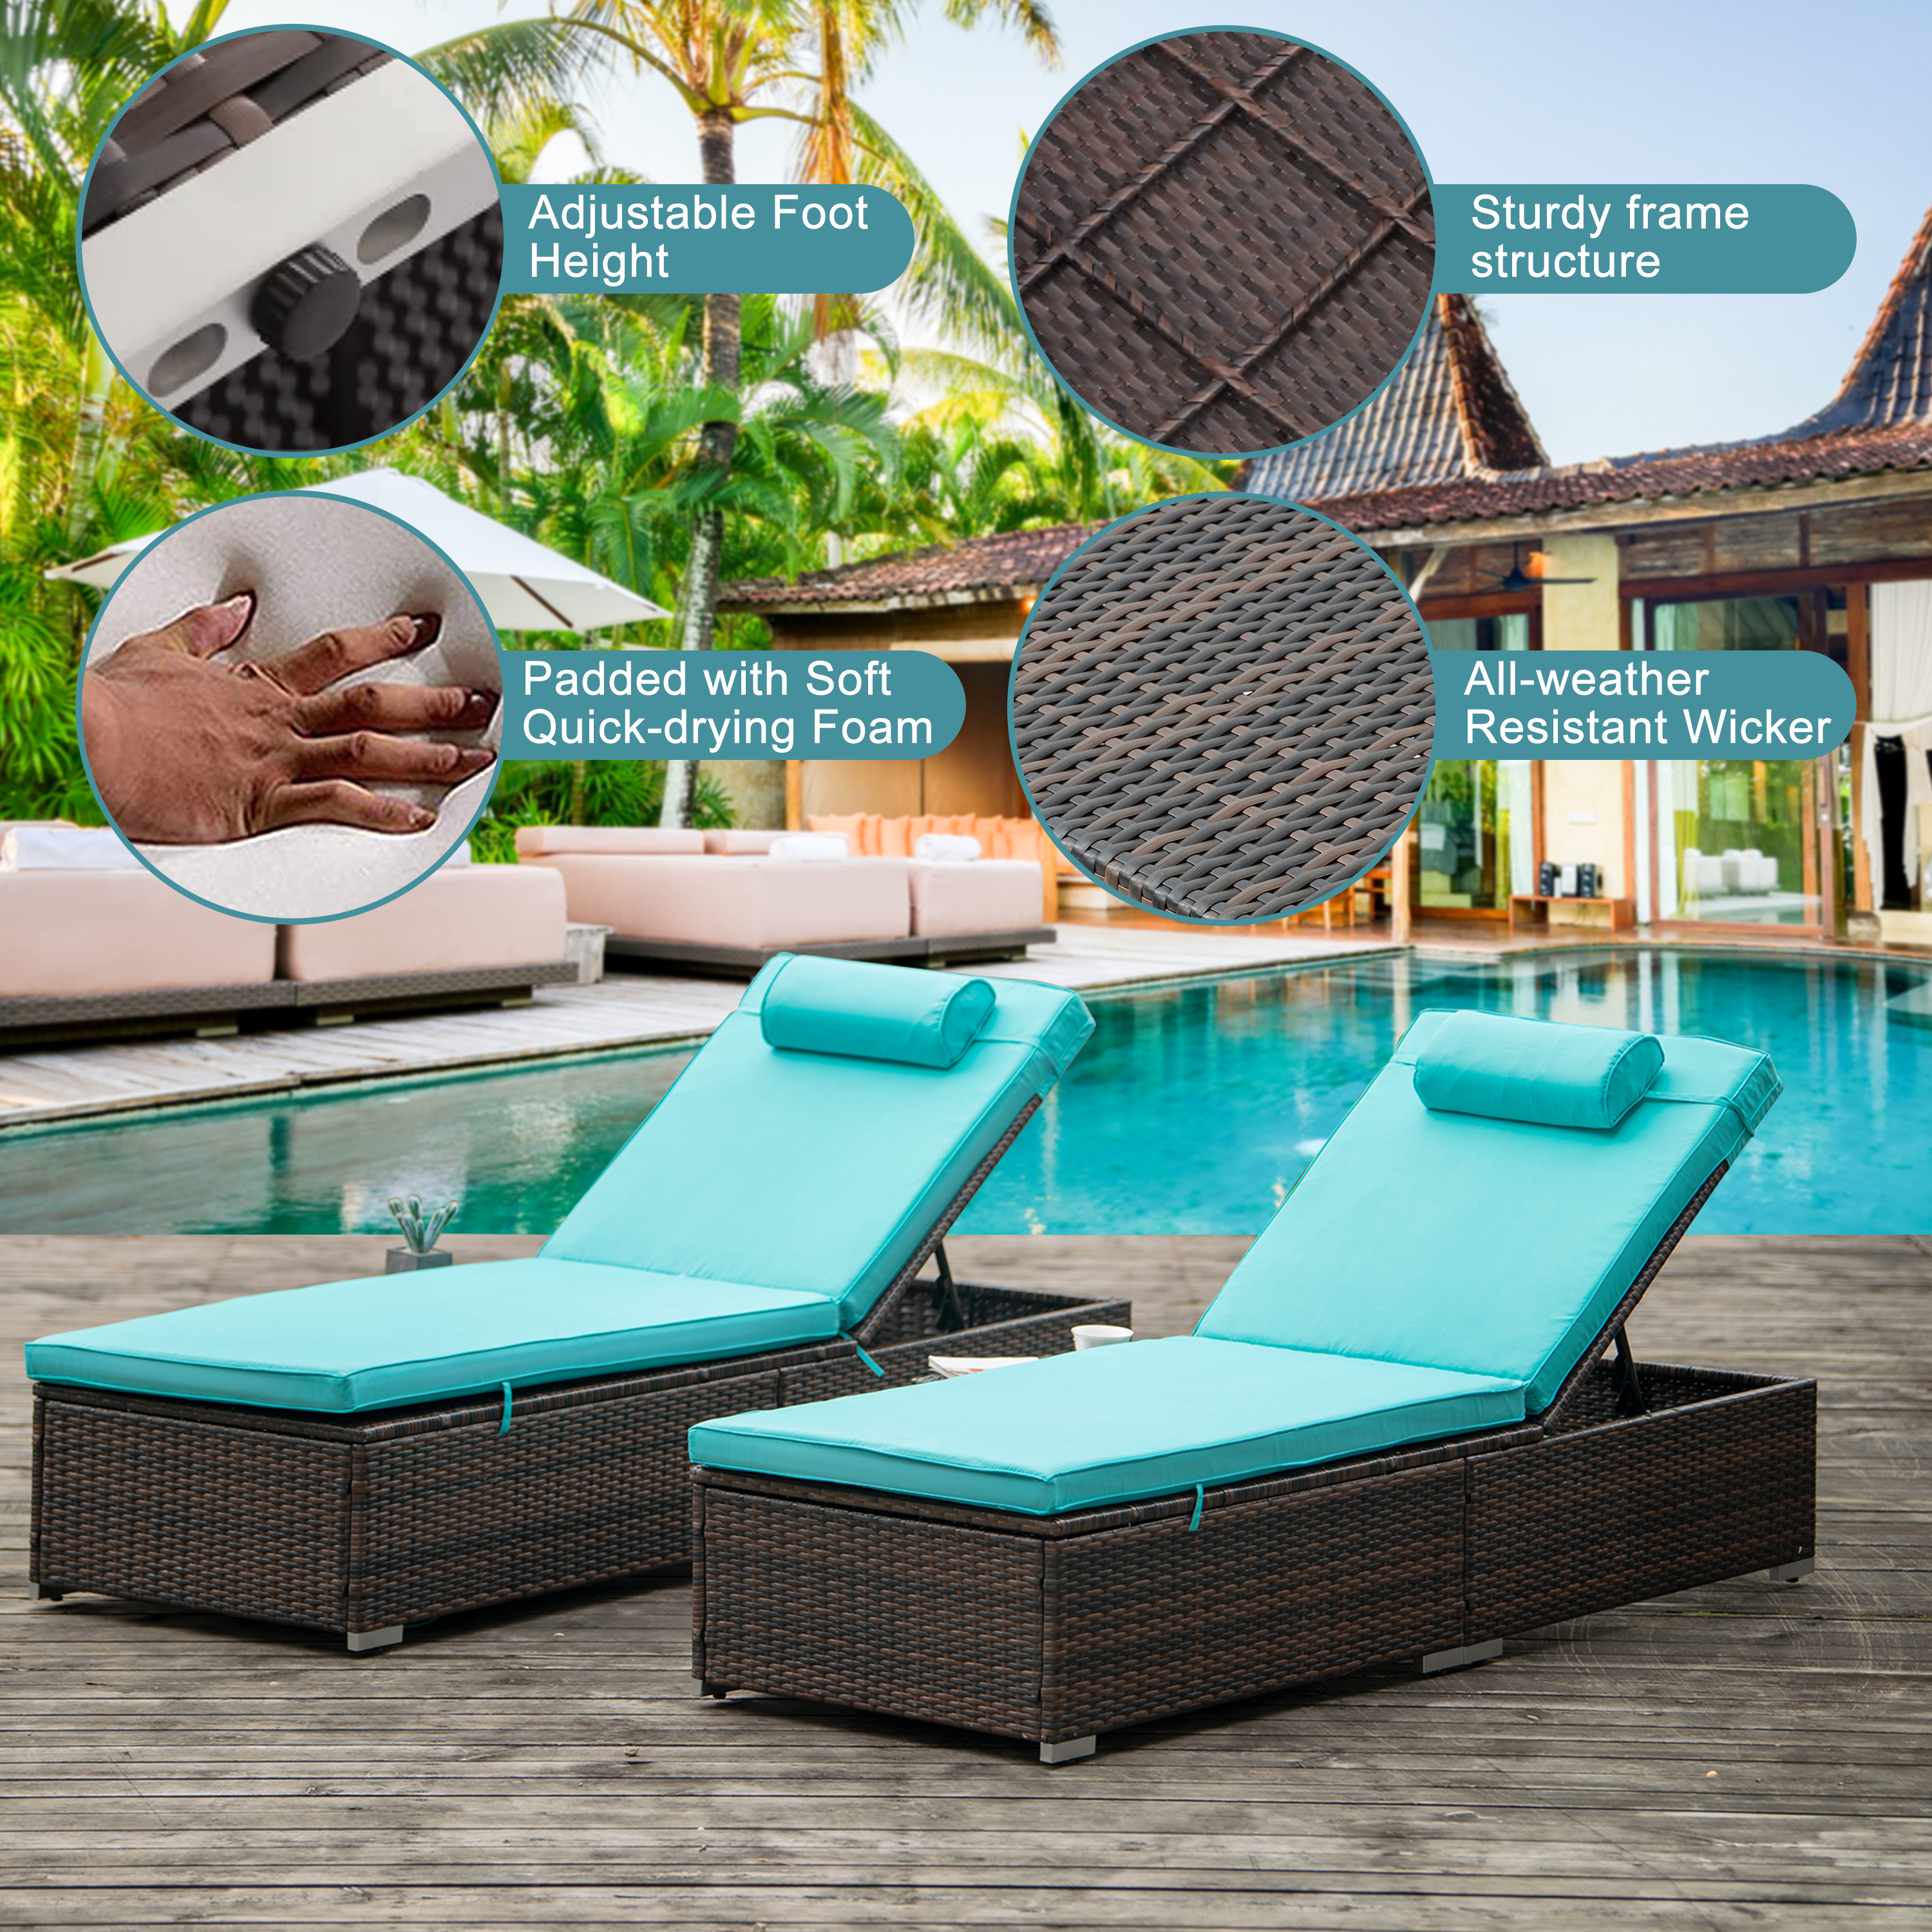 2 Pieces Outdoor Patio Lounge Furniture Set, Poolside Reclining PE Rattan Chaise Recliners with Side Table, Tempered Glass Top Coffee Table, Brown PE Wicker and Blue Cushions, SS2341 - image 2 of 8